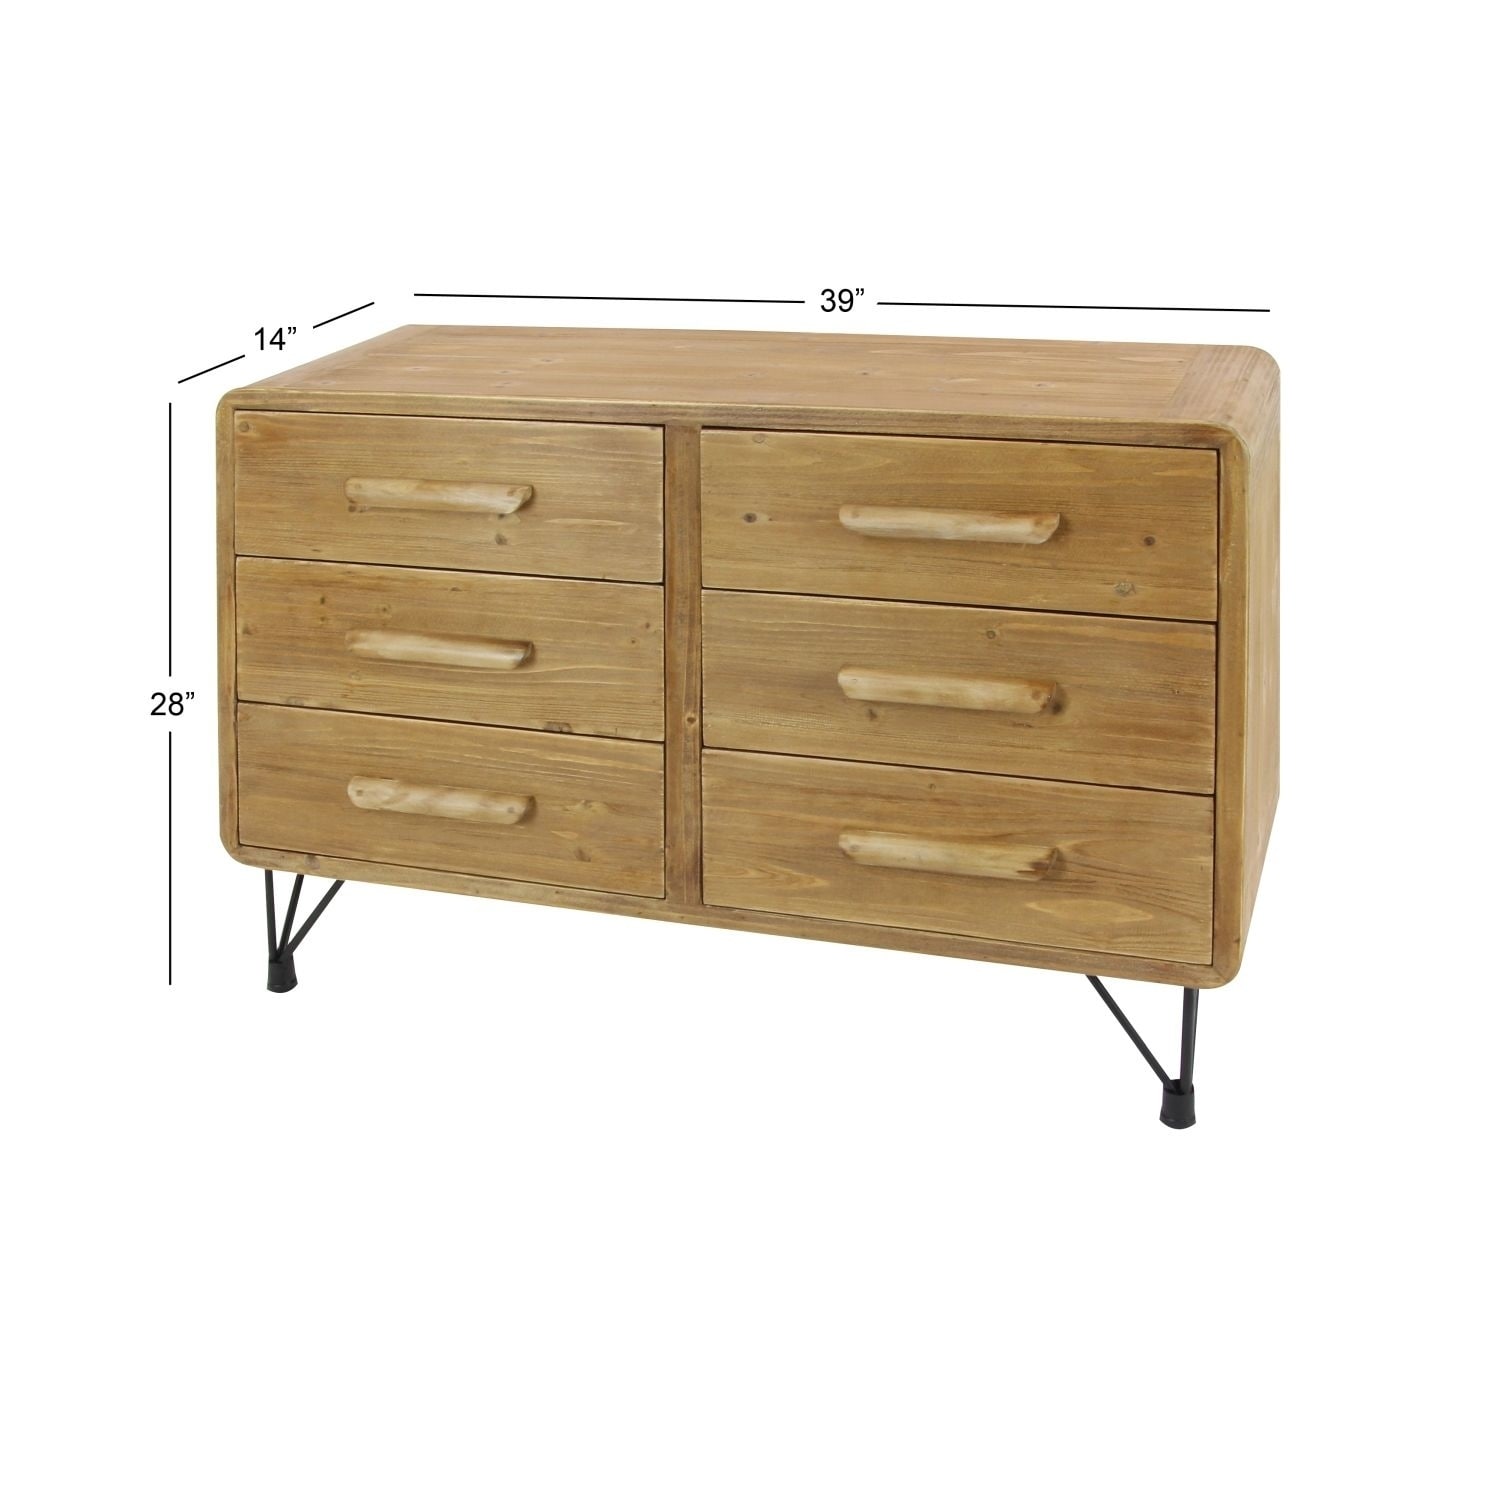 Shop Studio 350 Wood Metal 6 Drawr Chest 39 Inches Wide 28 Inches